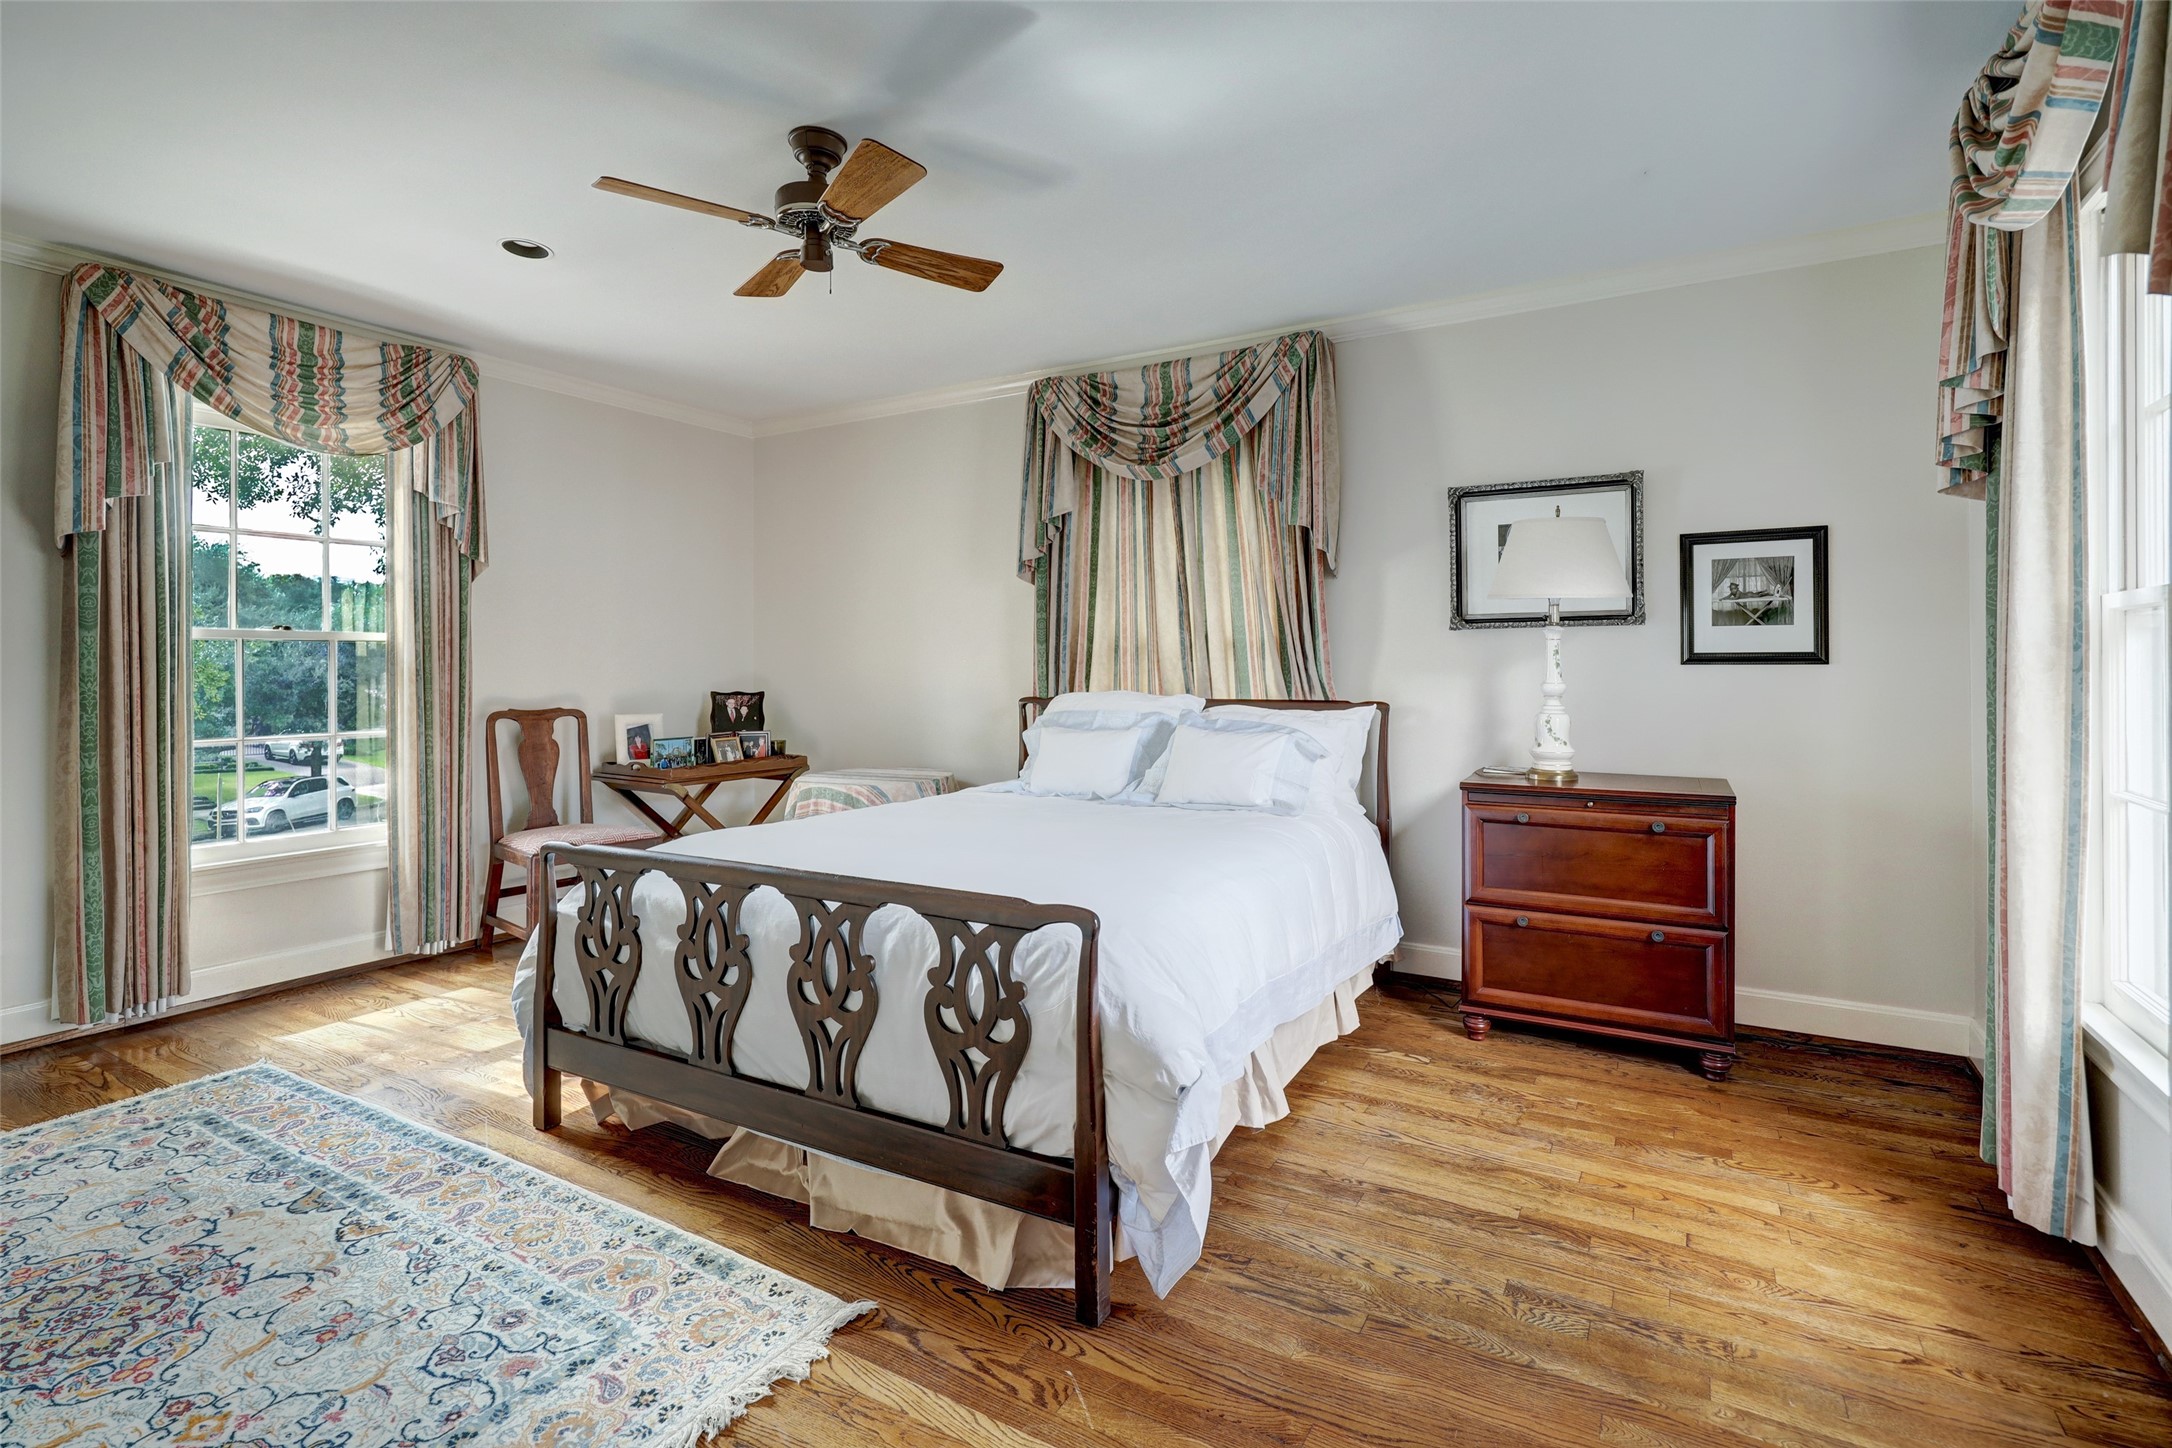 Rich hardwood floors and large windows enhance the aesthetic appeal of the fourth bedroom.